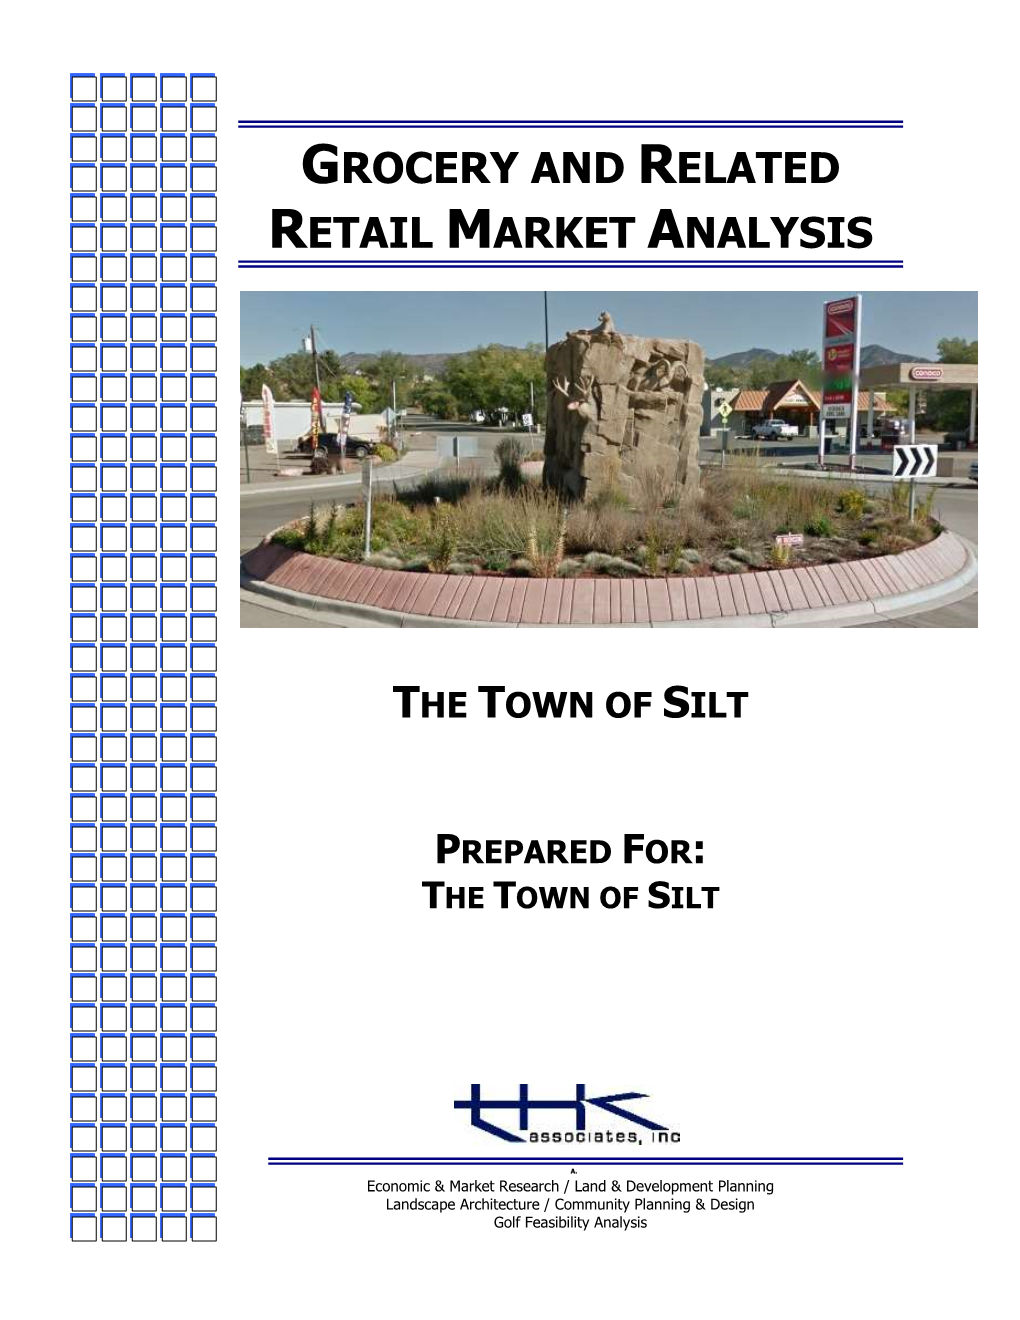 Grocer and Retail Market Analysis